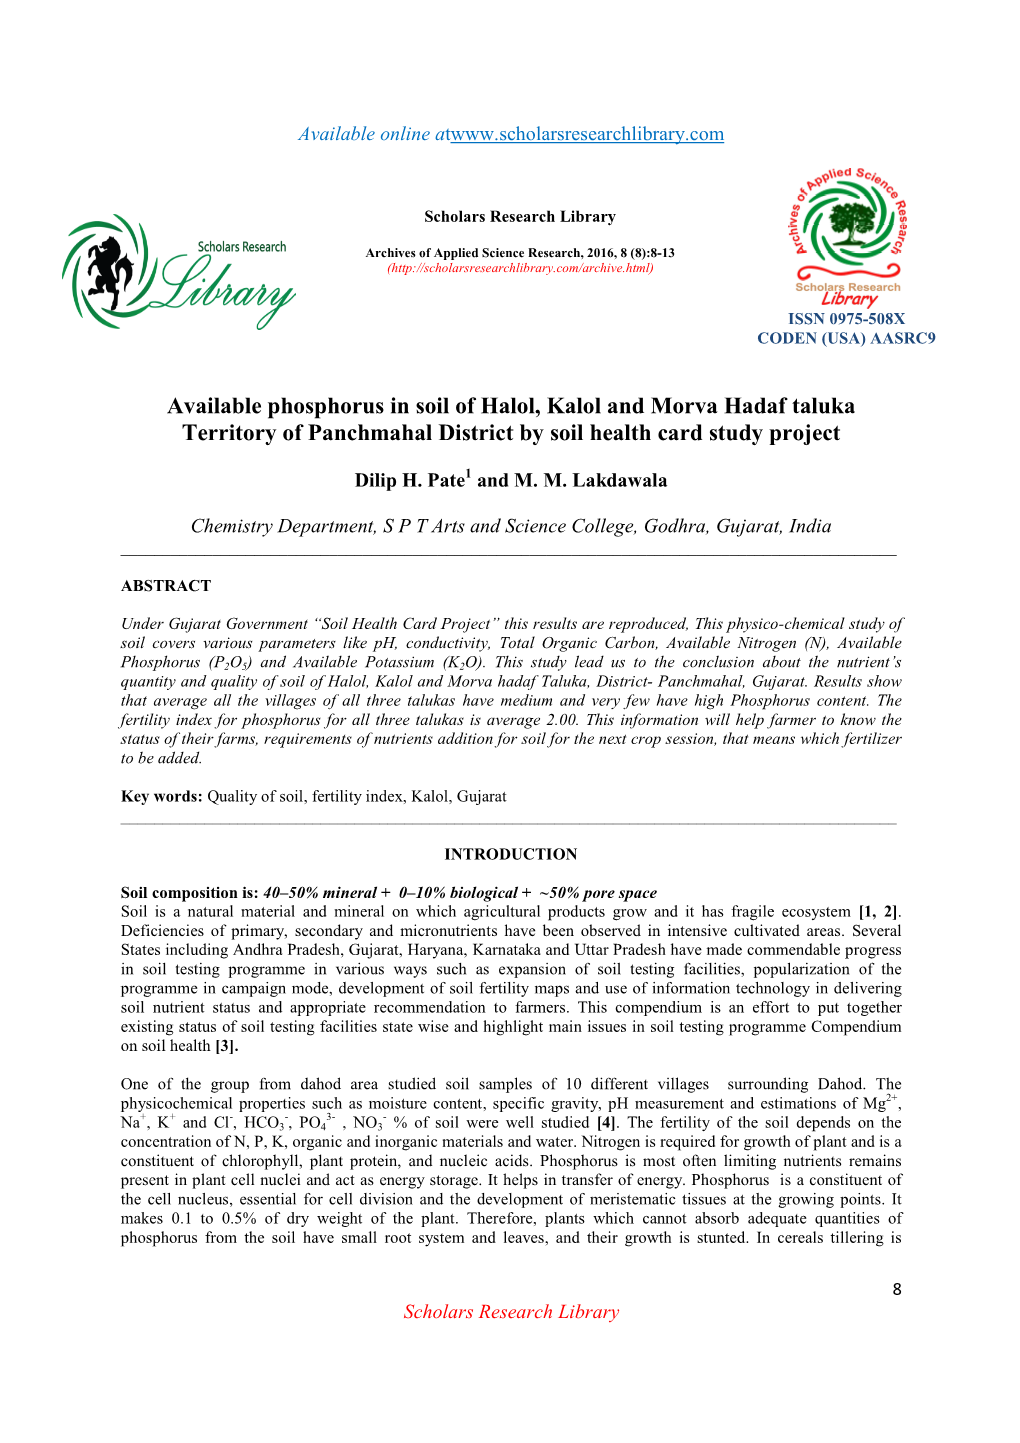 Available Phosphorus in Soil of Halol, Kalol and Morva Hadaf Taluka Territory of Panchmahal District by Soil Health Card Study Project